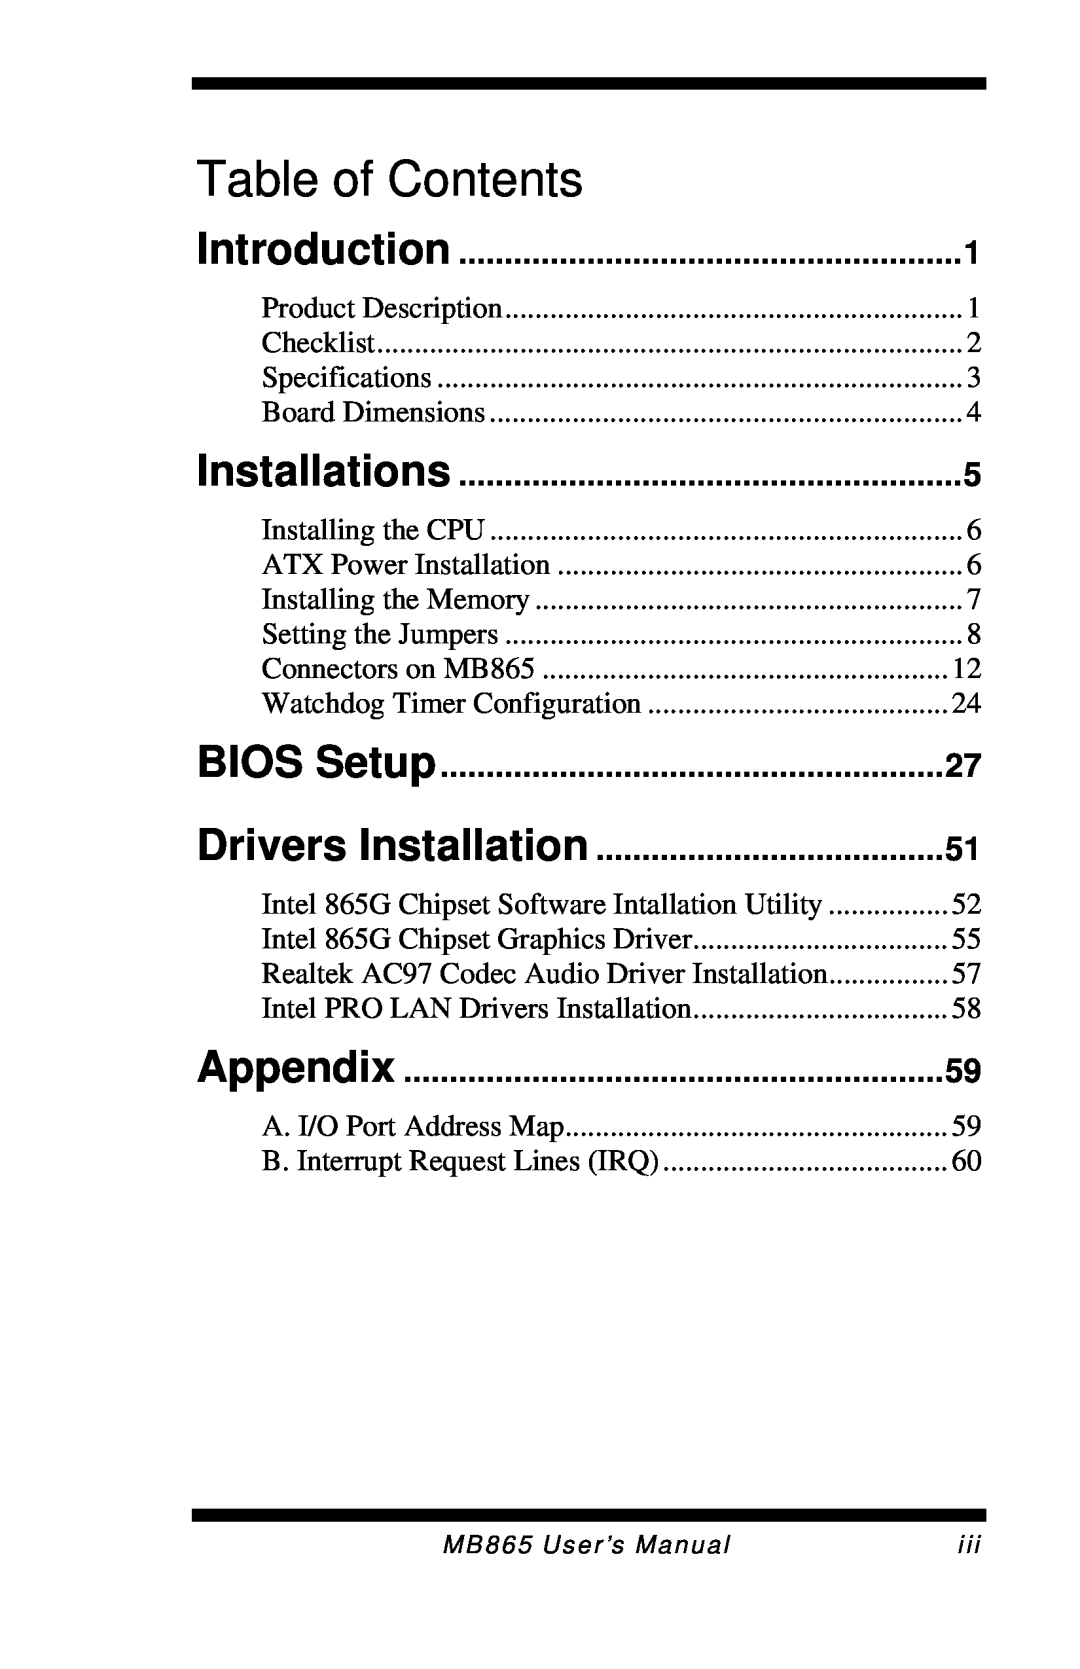 Intel MB865 user manual Introduction, Installations, BIOS Setup, Drivers Installation, Appendix, Table of Contents 